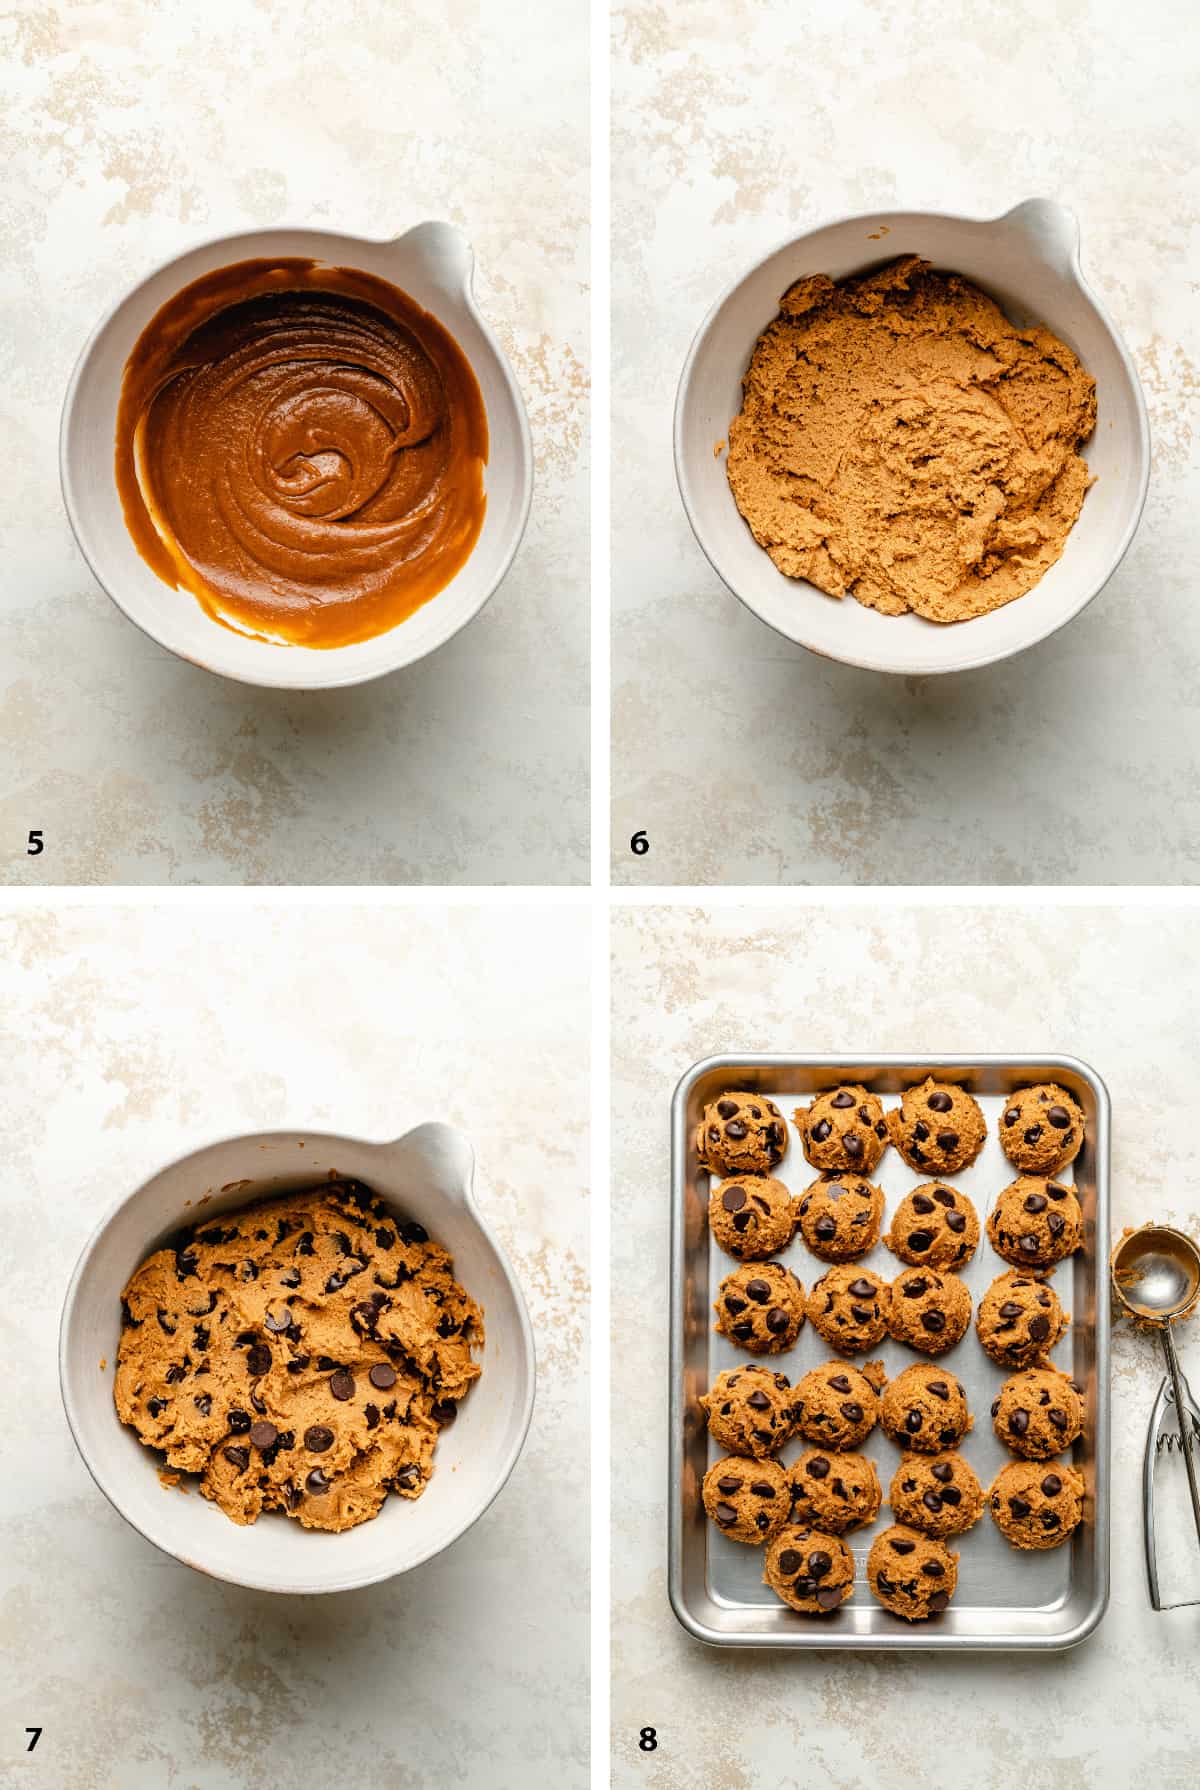 Process steps of making the chocolate chip cookie dough.